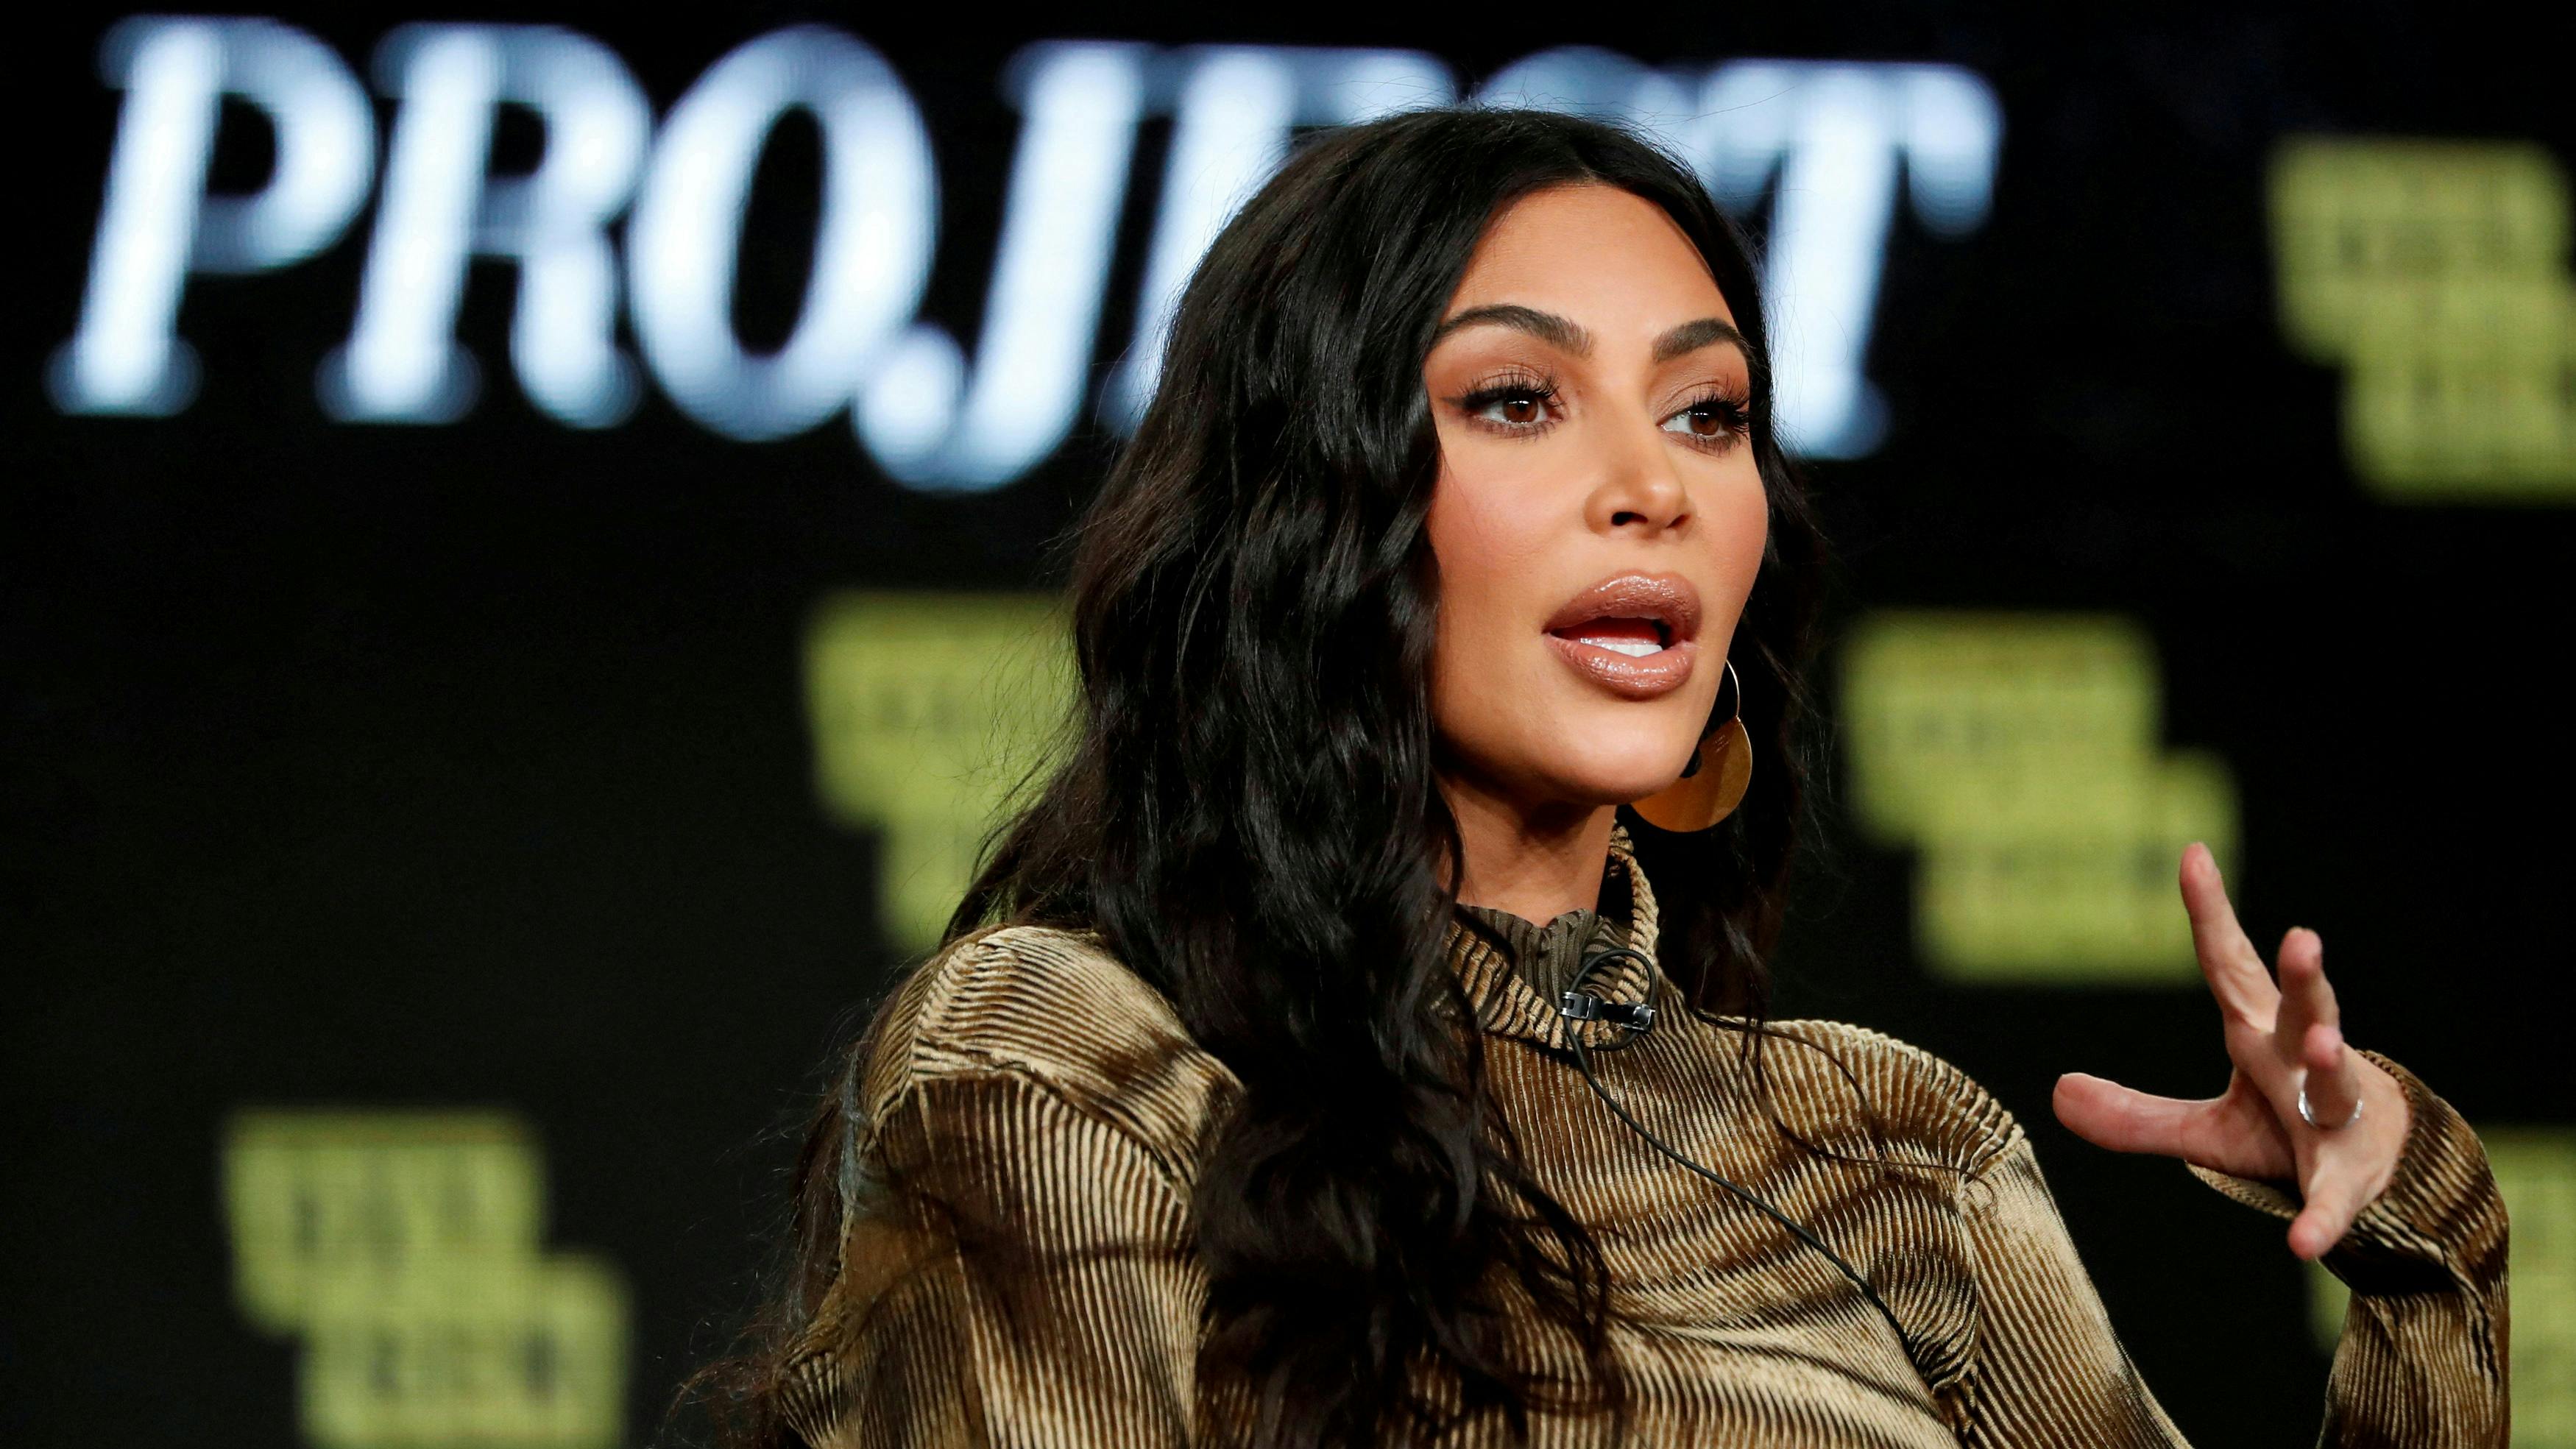 FILE PHOTO: Television personality Kim Kardashian attends a panel for the documentary "Kim Kardashian West: The Justice Project" during the Winter TCA (Television Critics Association) Press Tour in Pasadena, California, U.S., January 18, 2020. REUTERS/Mario Anzuoni/File Photo/File Photo